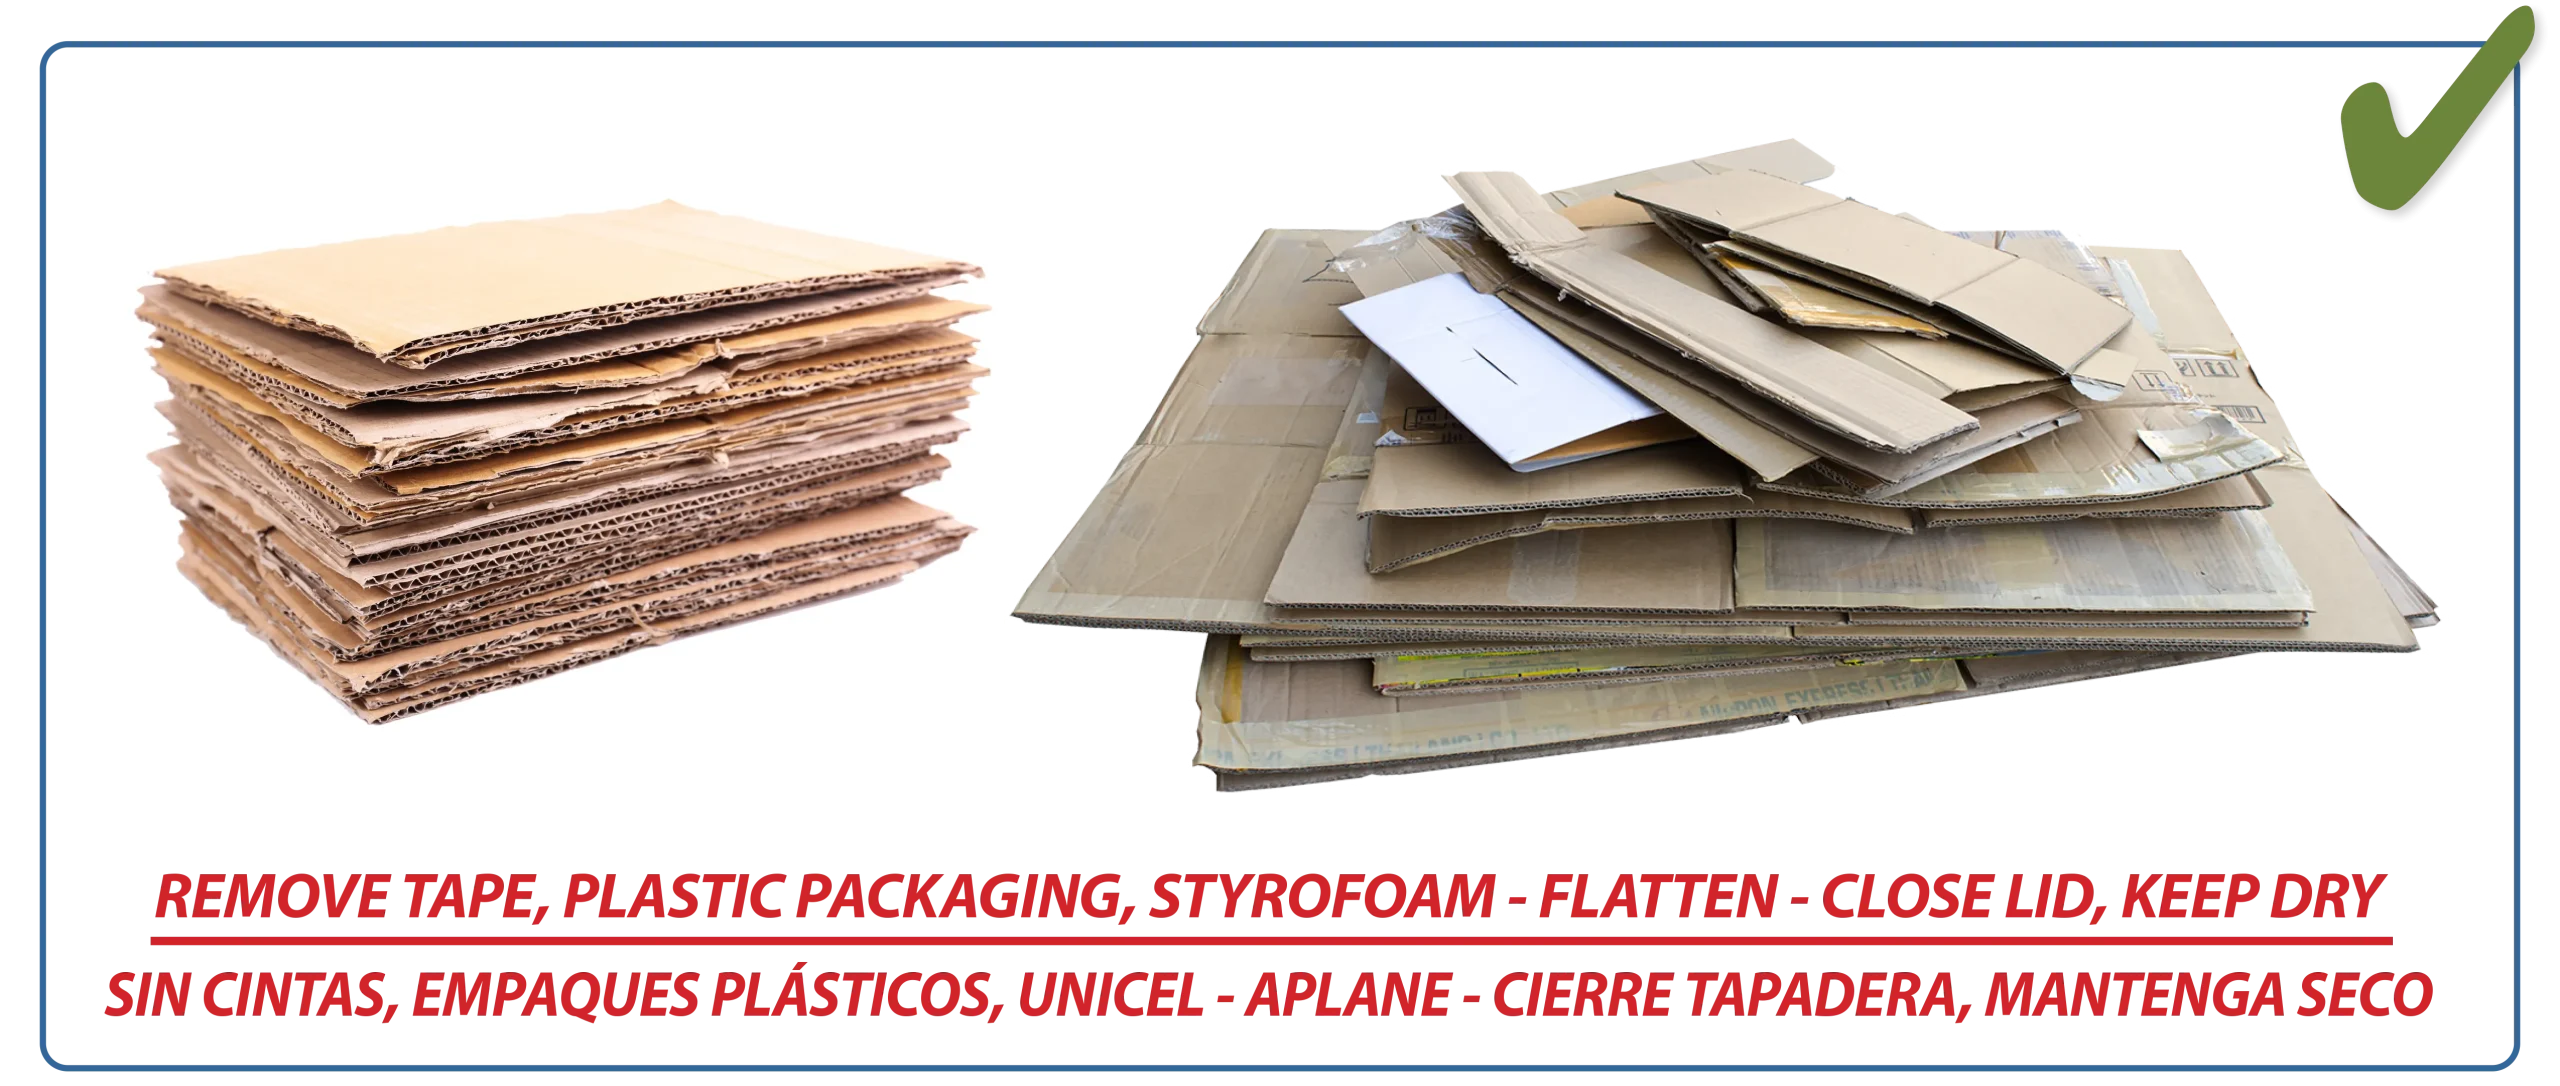 Images of stacked cardboard accepted in the cardboard recycling bin